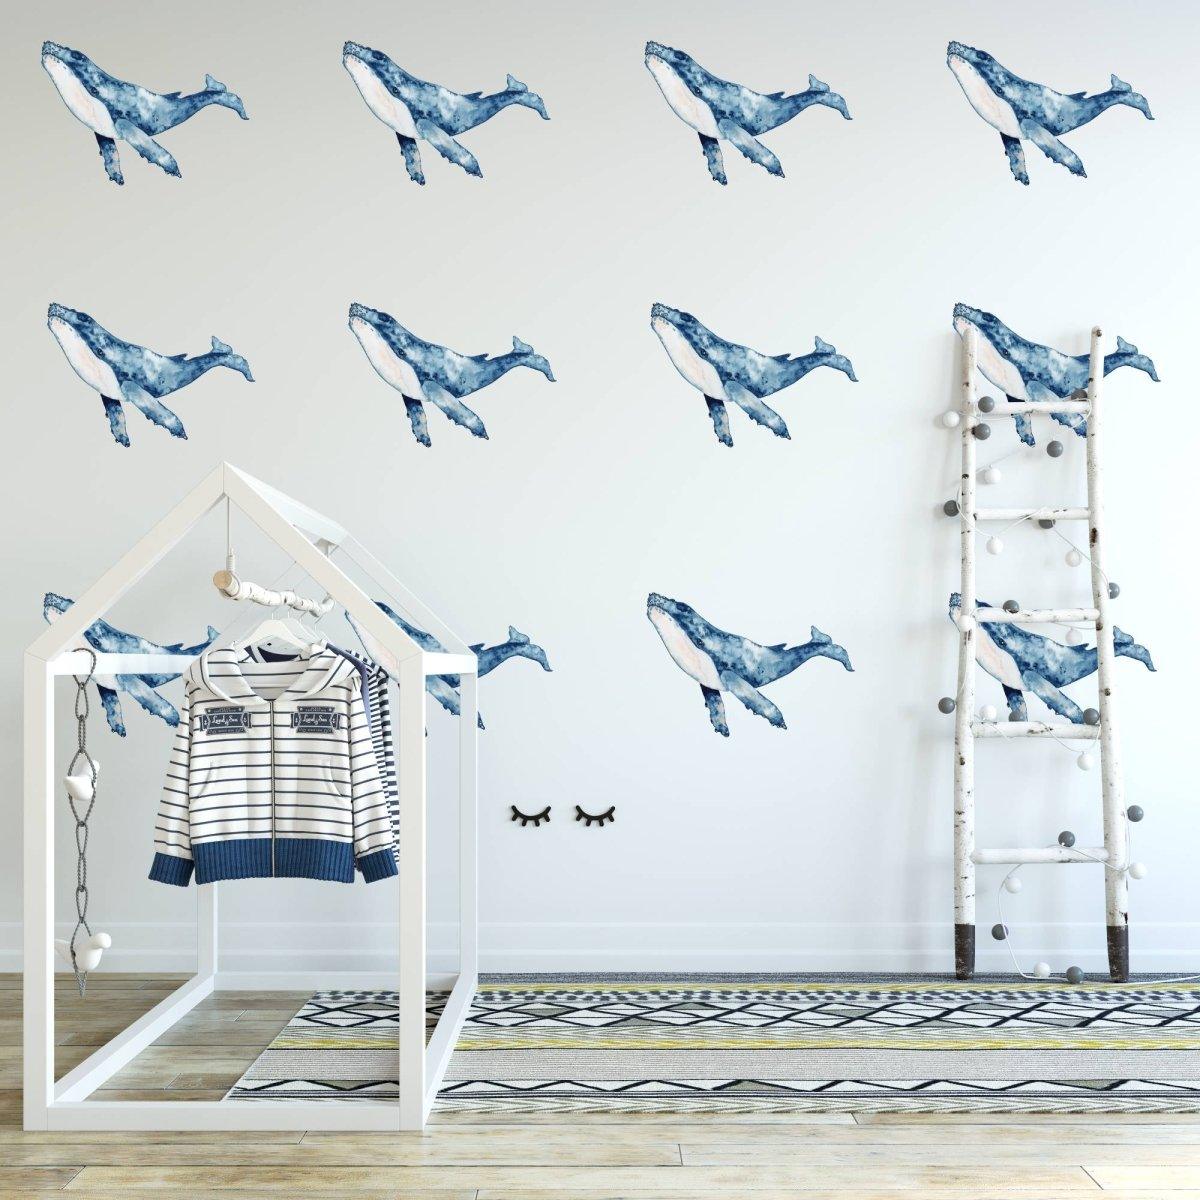 Whale Wall Decals - Printibly